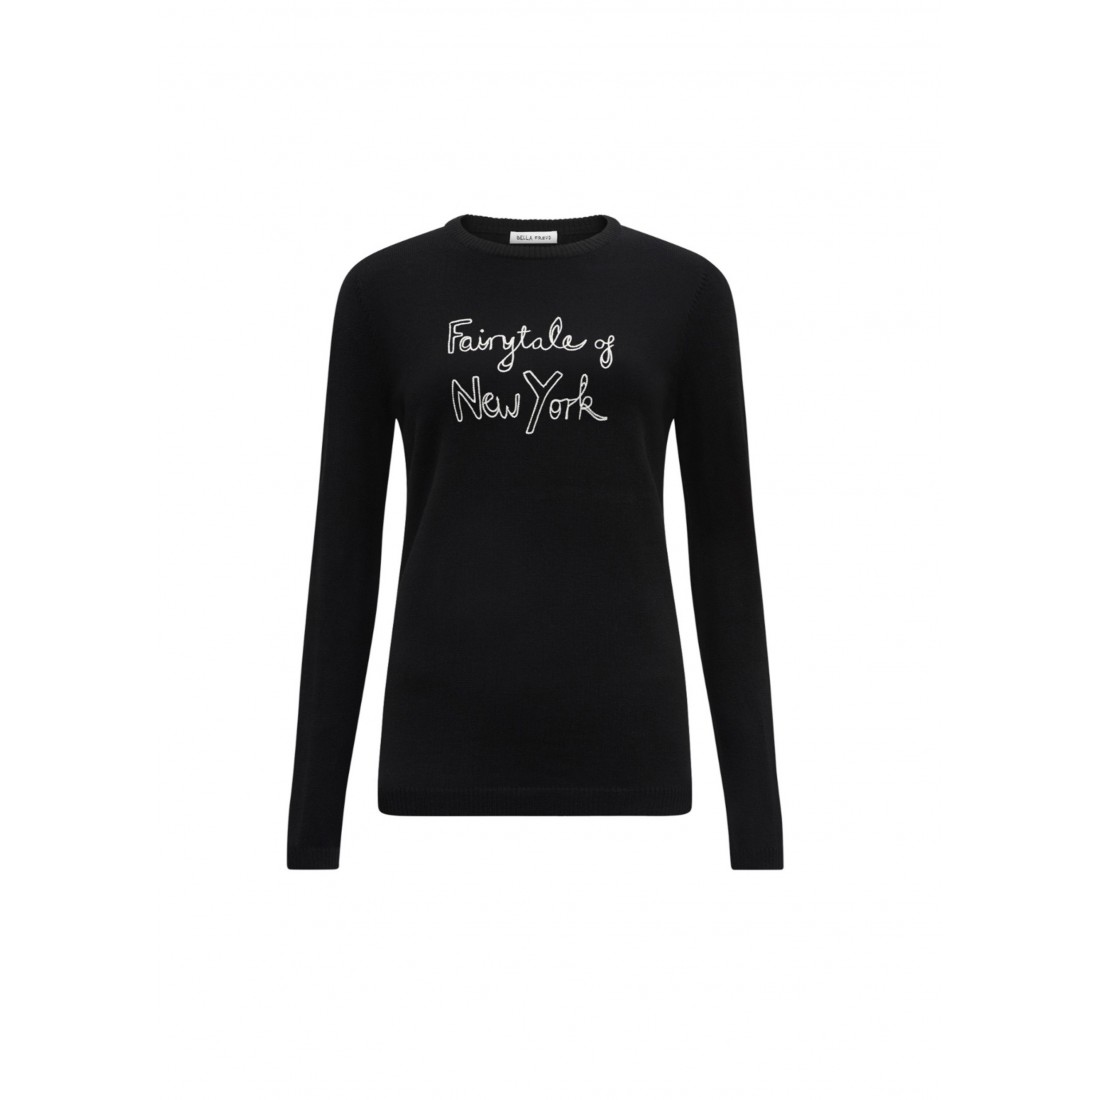 61% → Bella Freud Fairytale of New York Jumper Promotion → All the ...